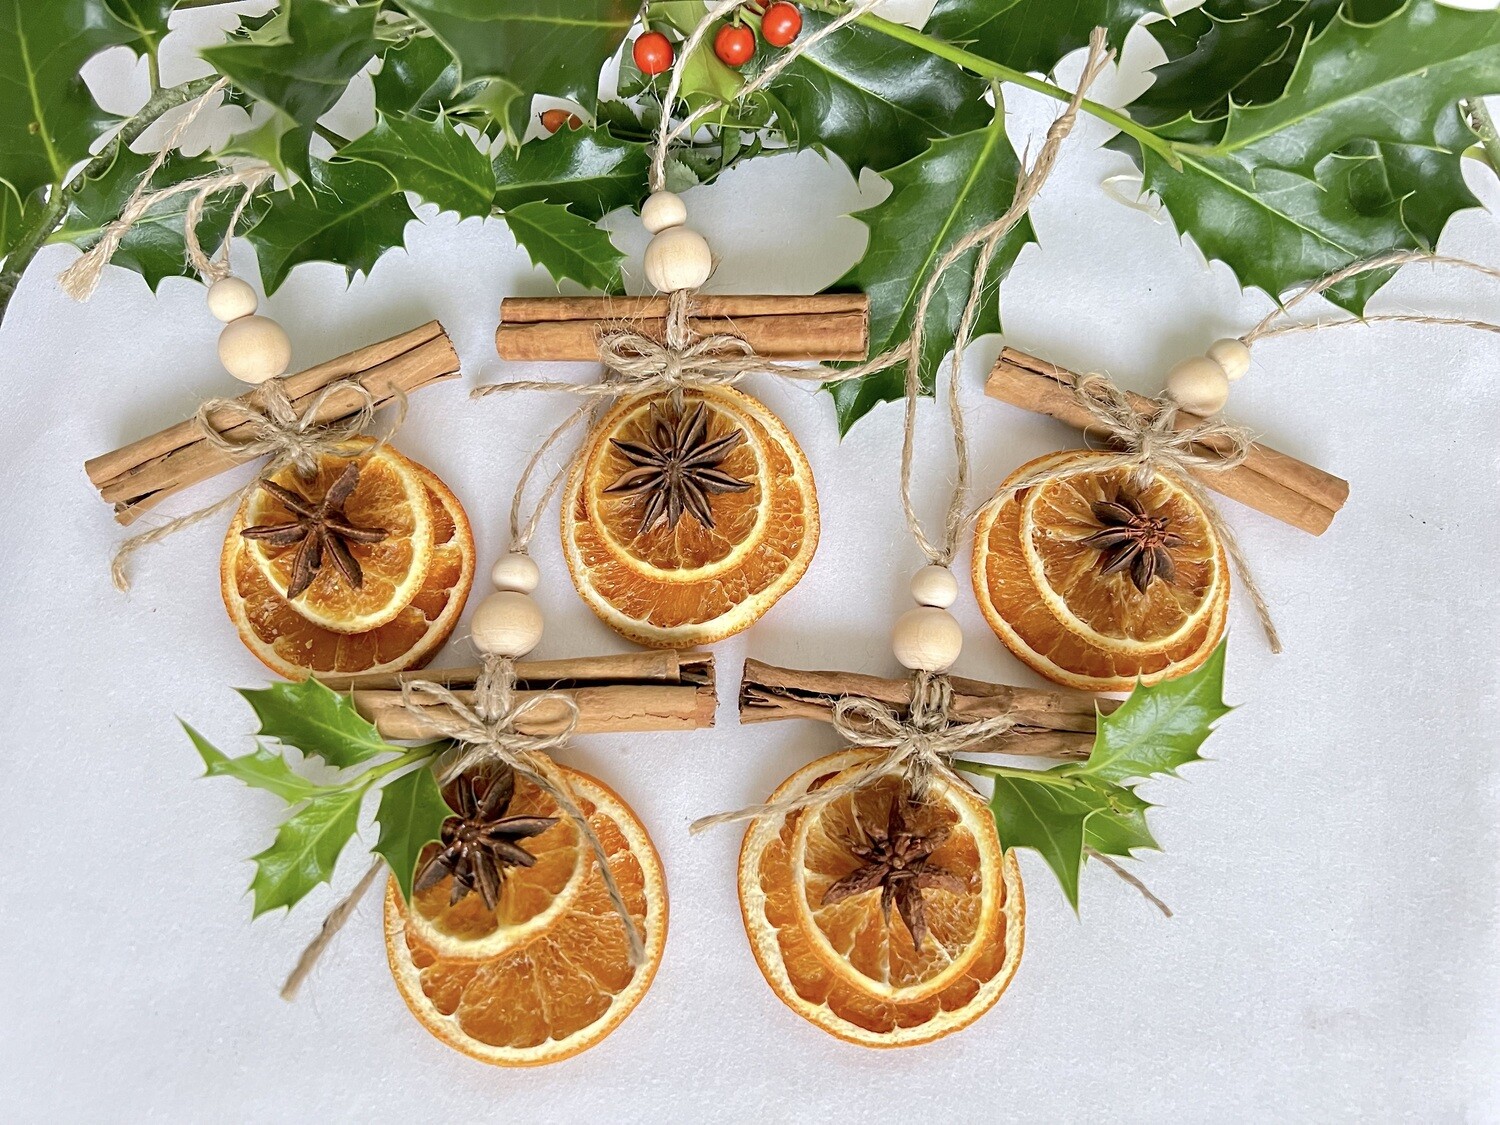 Natural Christmas decorations of dried oranges and cinnamon sticks in a  Christmas Market - Salzburg Stock Photo - Alamy